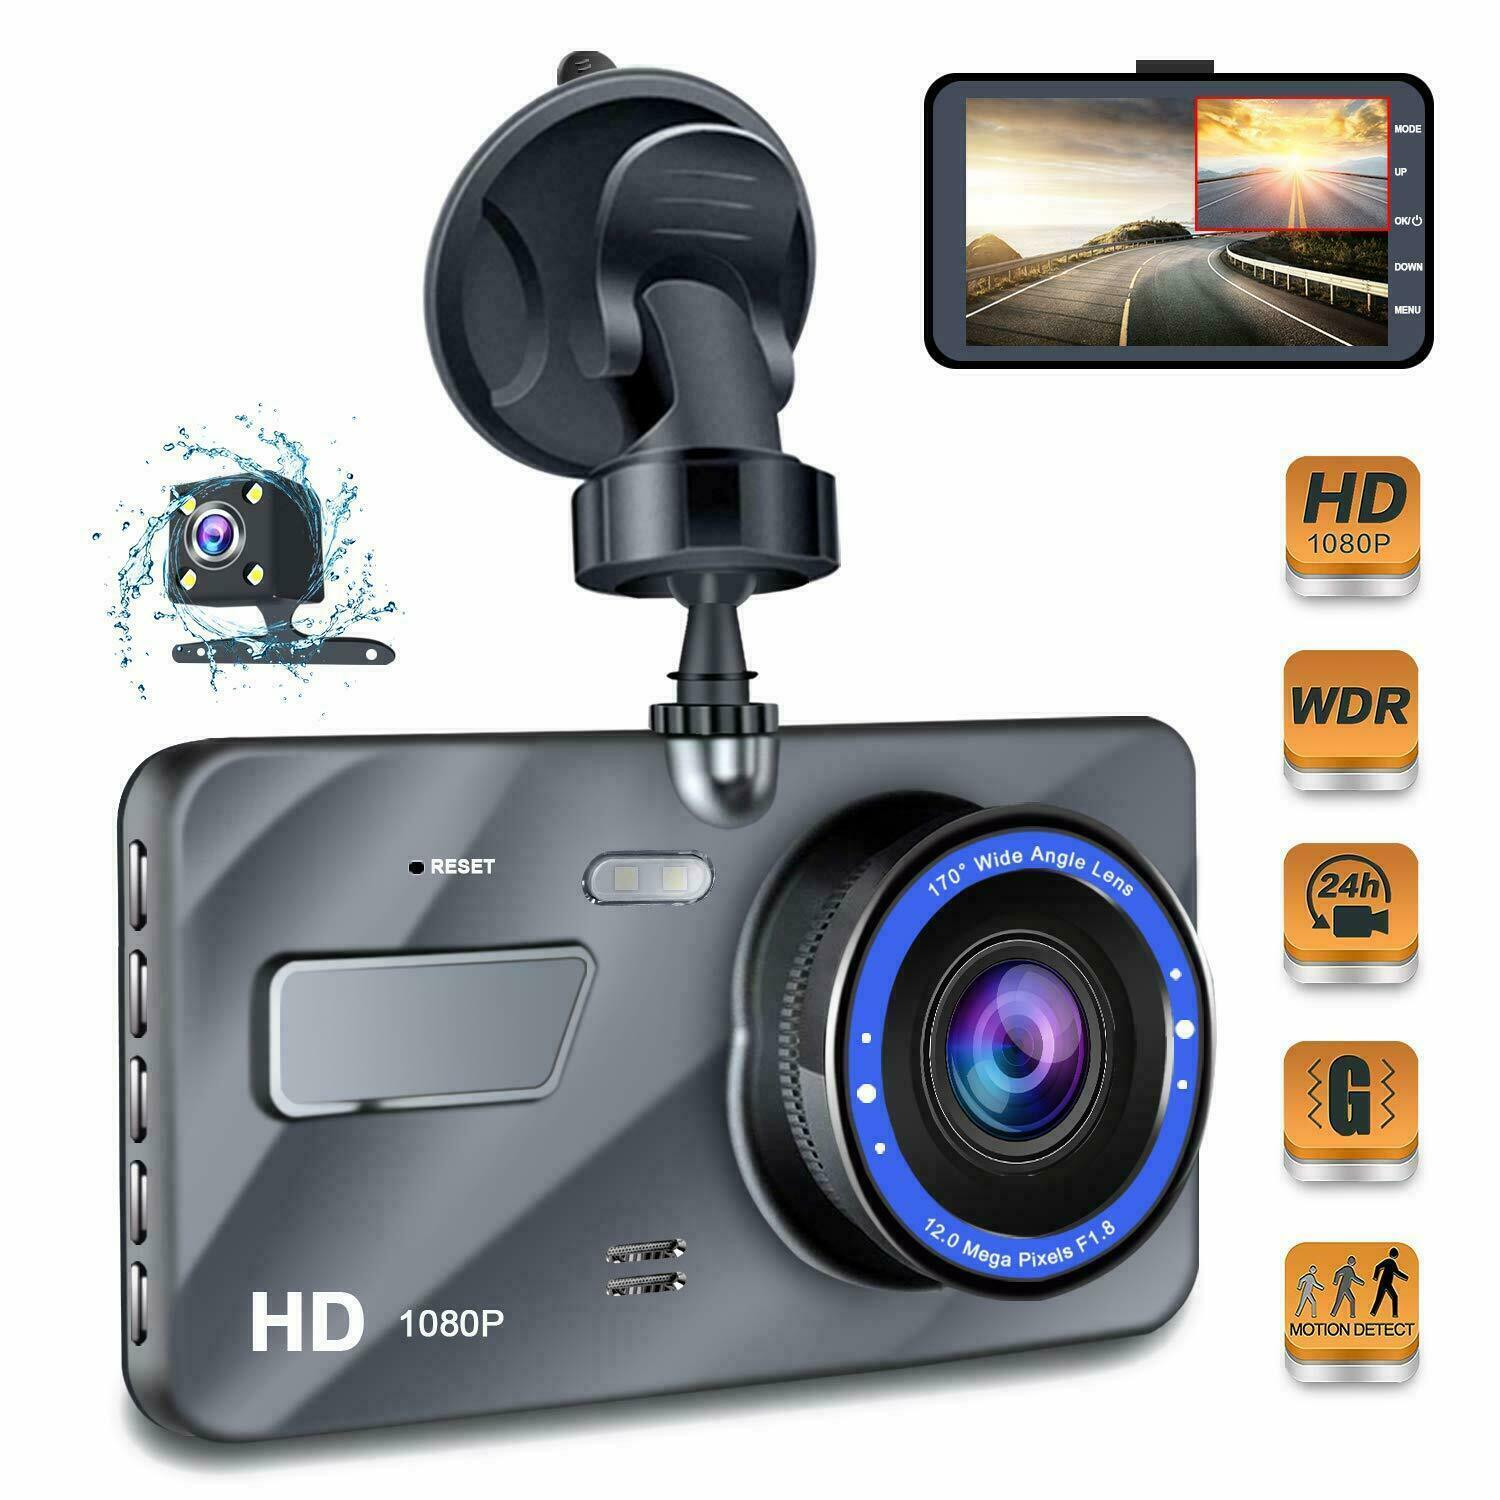 Dash Cam For Cars,Front And Inside,1080P Dual Camera With IR Night  Vision,Loop Recording,Car DVR Blackbox With 2 Inch IPS Screen